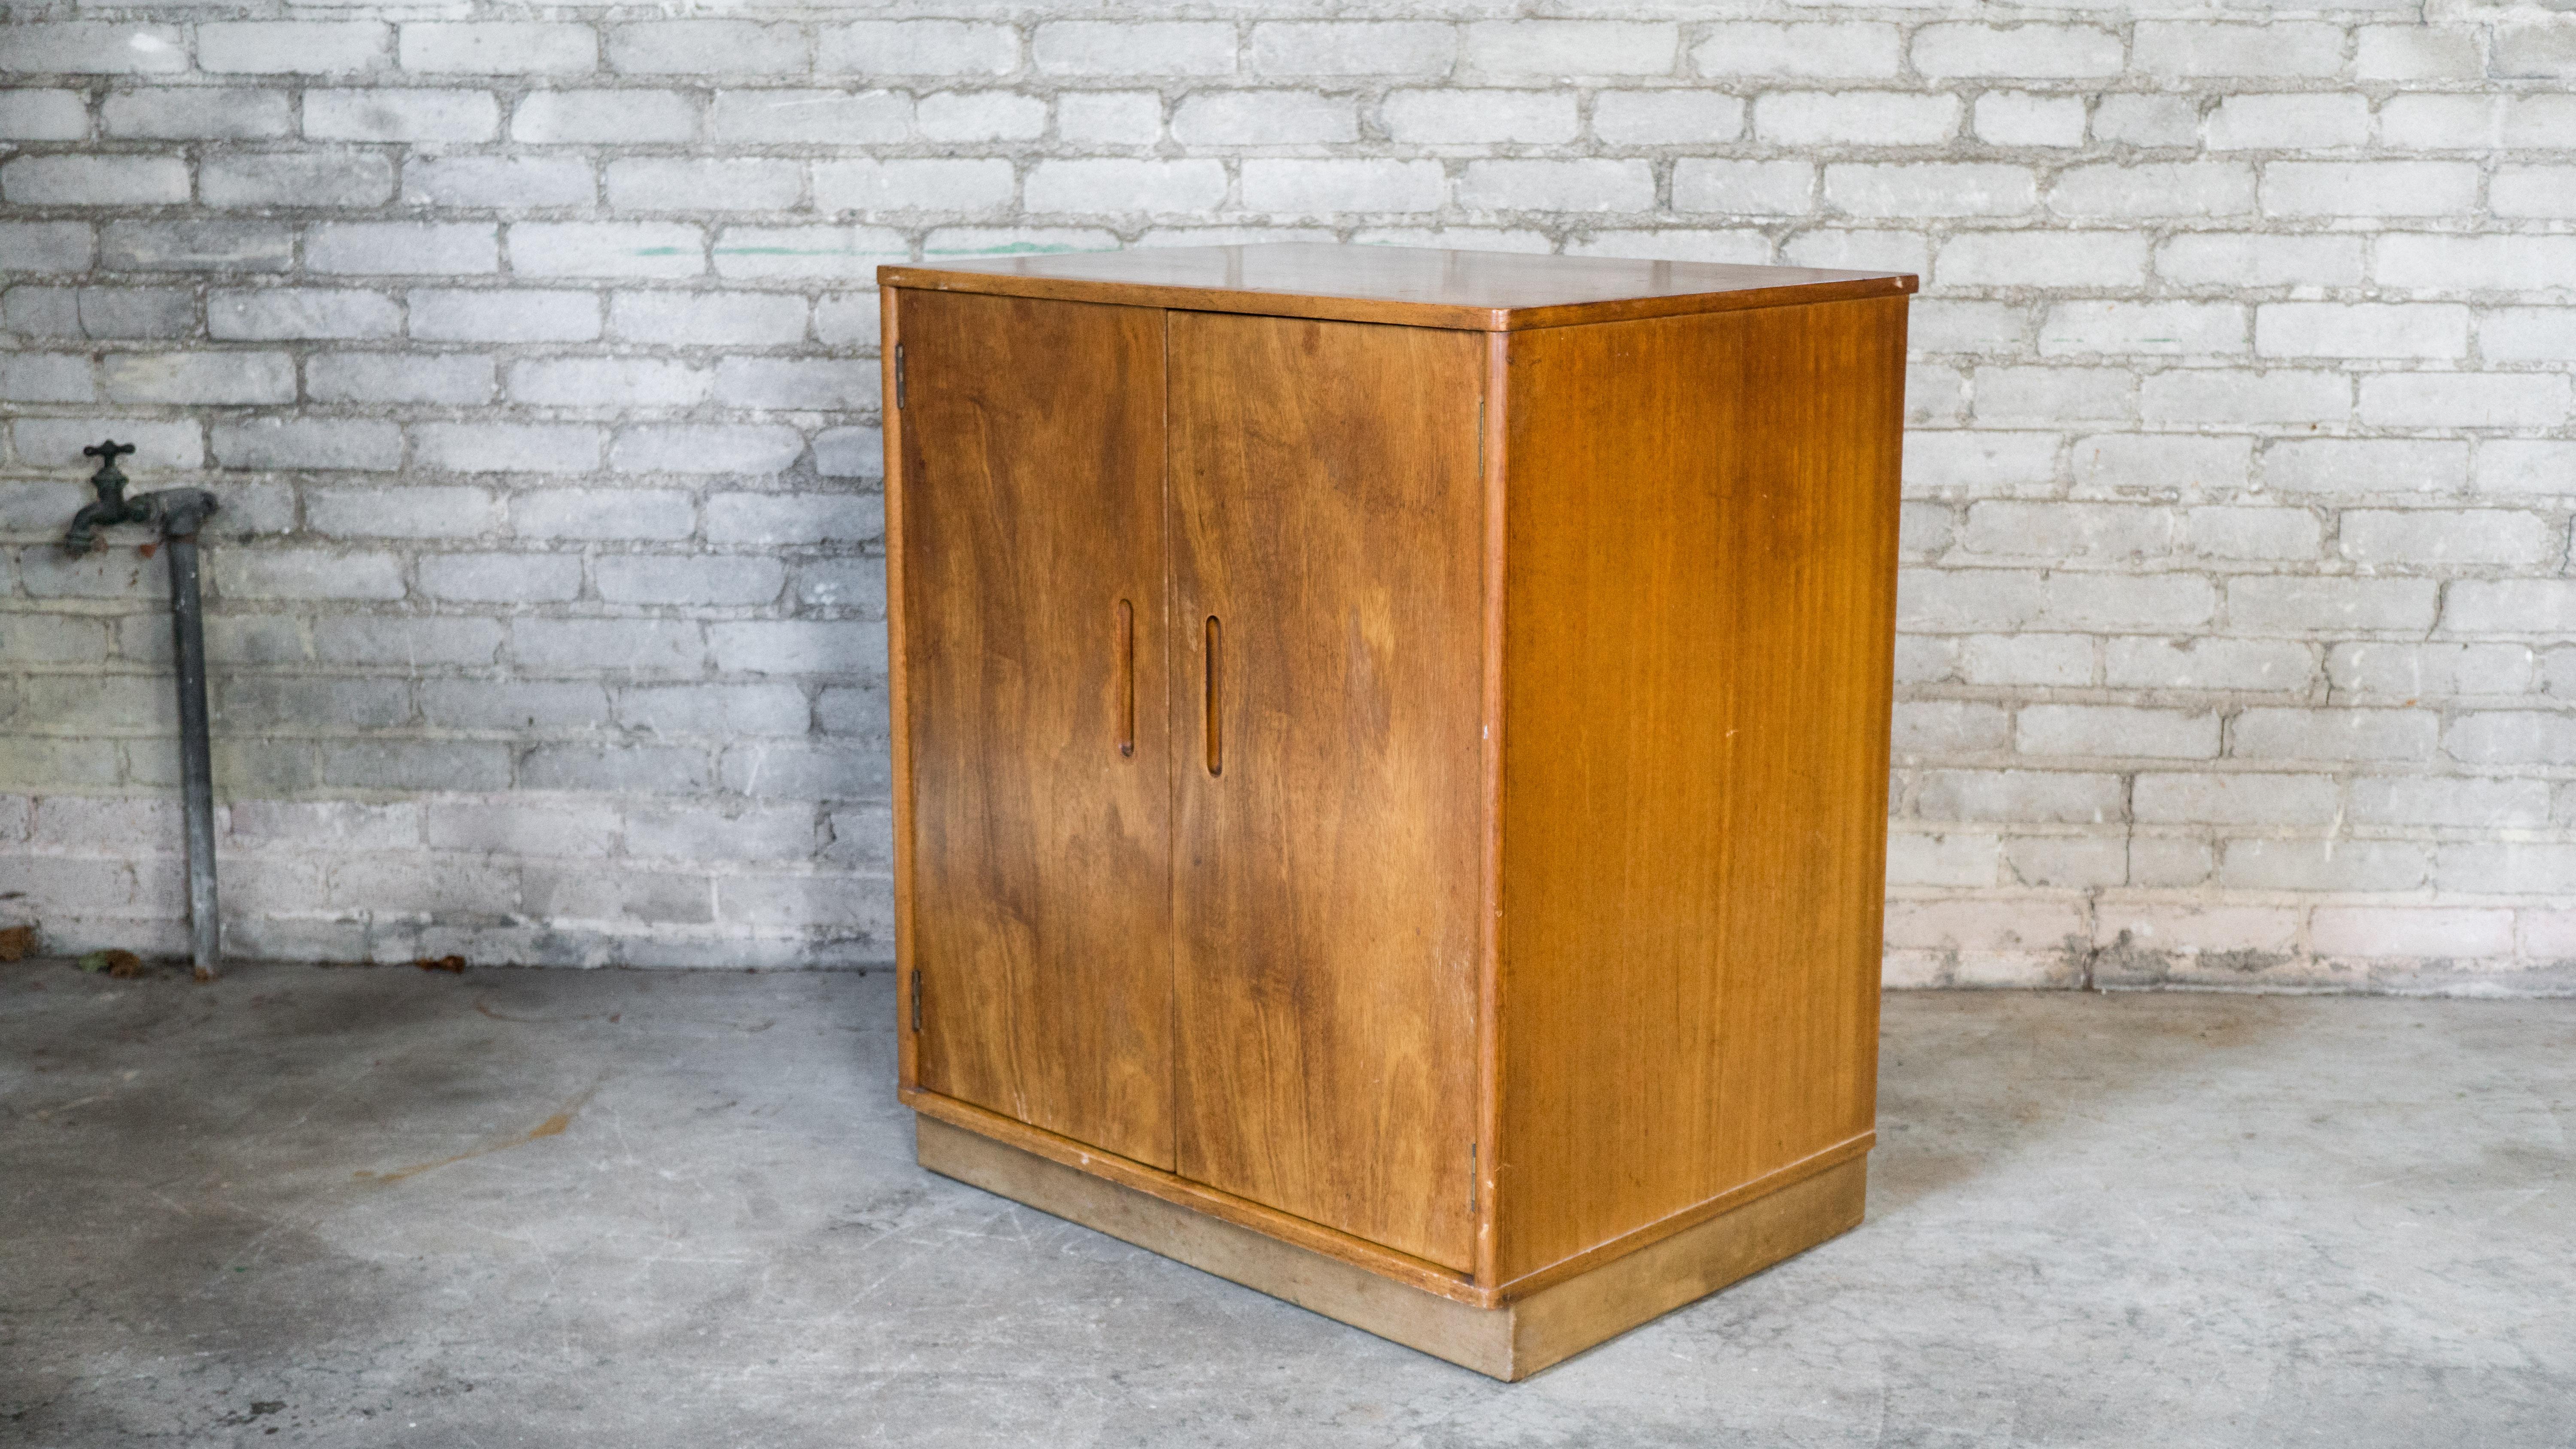 Edward Wormely for Dunbar cabinet, circa 1950s. Presented in mahogany, showing lovely woodgrain details. Two doors open to three adjustable selves. Perfect size for various uses. Metal notches keep doors in place when closed. Dovetail joints,